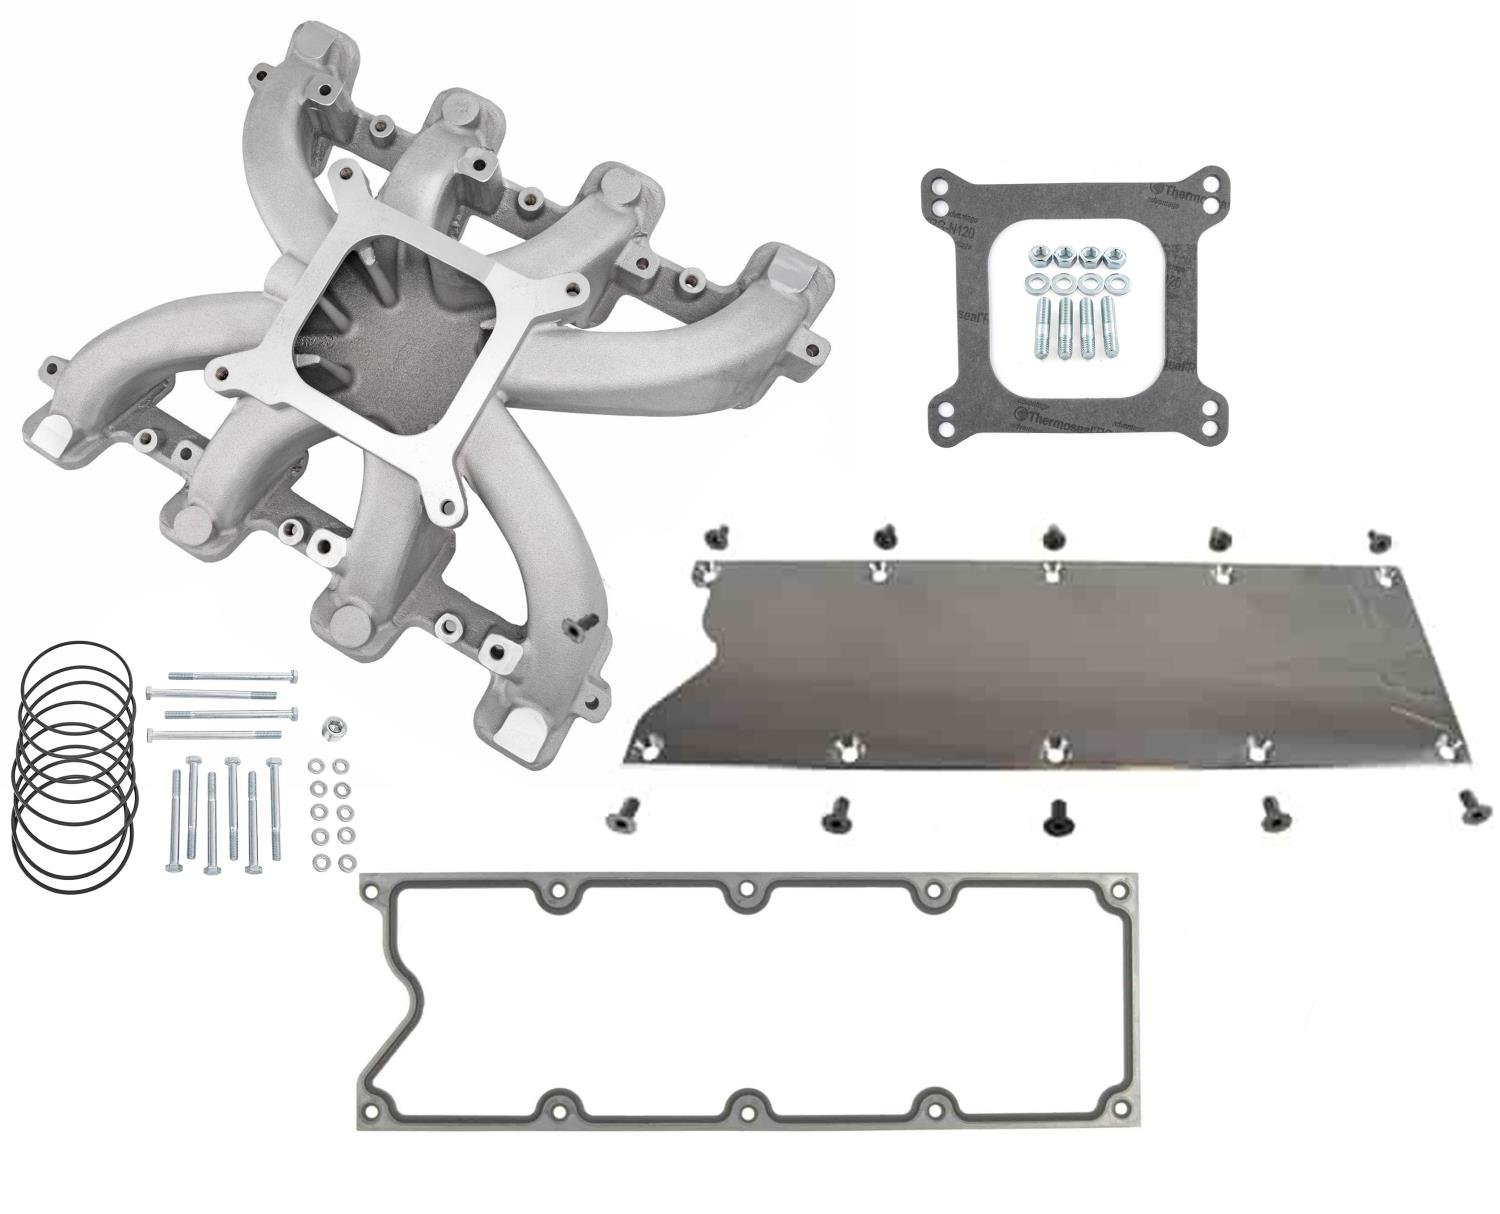 Mid-Rise Single Plane Intake Manifold Kit for GM LS1/LS2/LS6 with Cathedral Port Heads